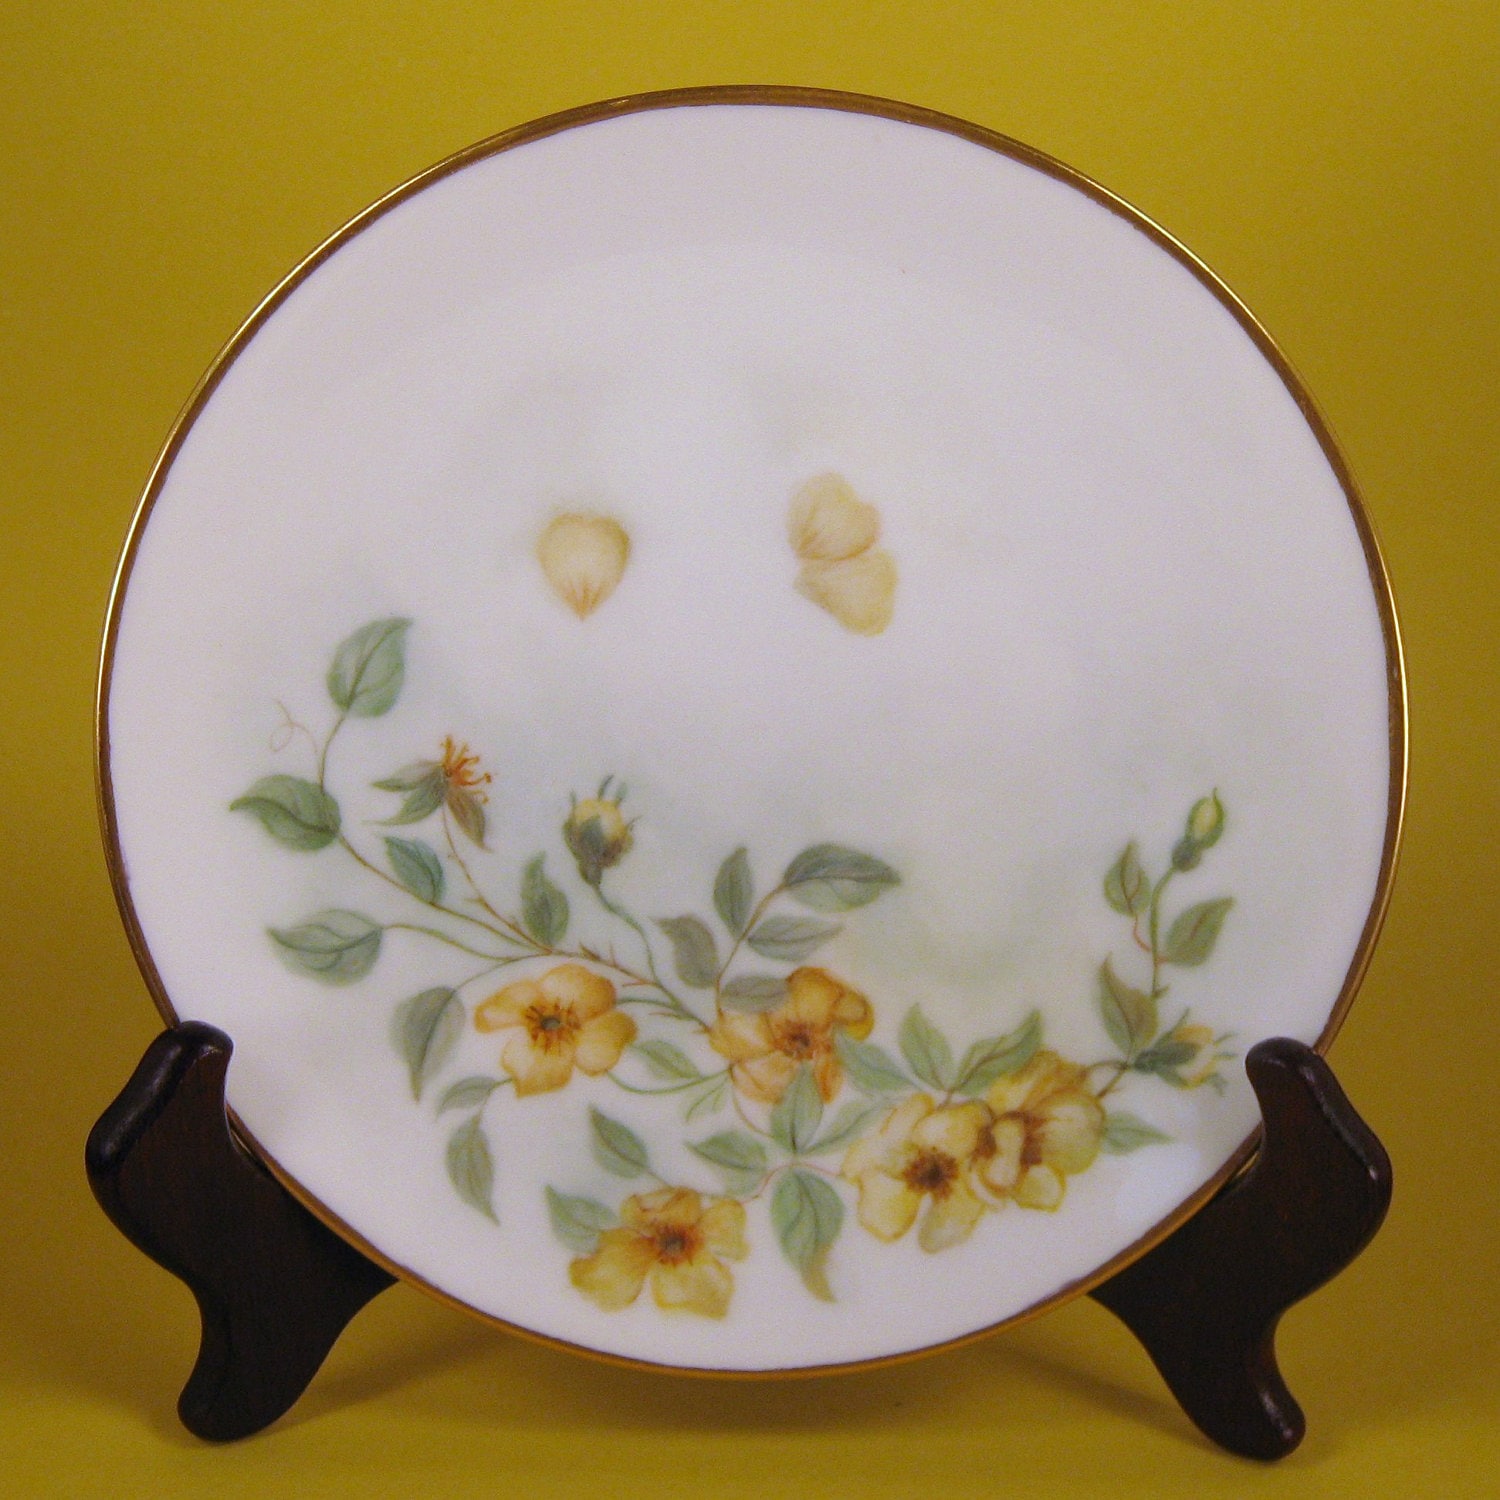 Hutschenreuther Cake Plate Yellow Flowers Green Leaves Selb Bavaria Germany